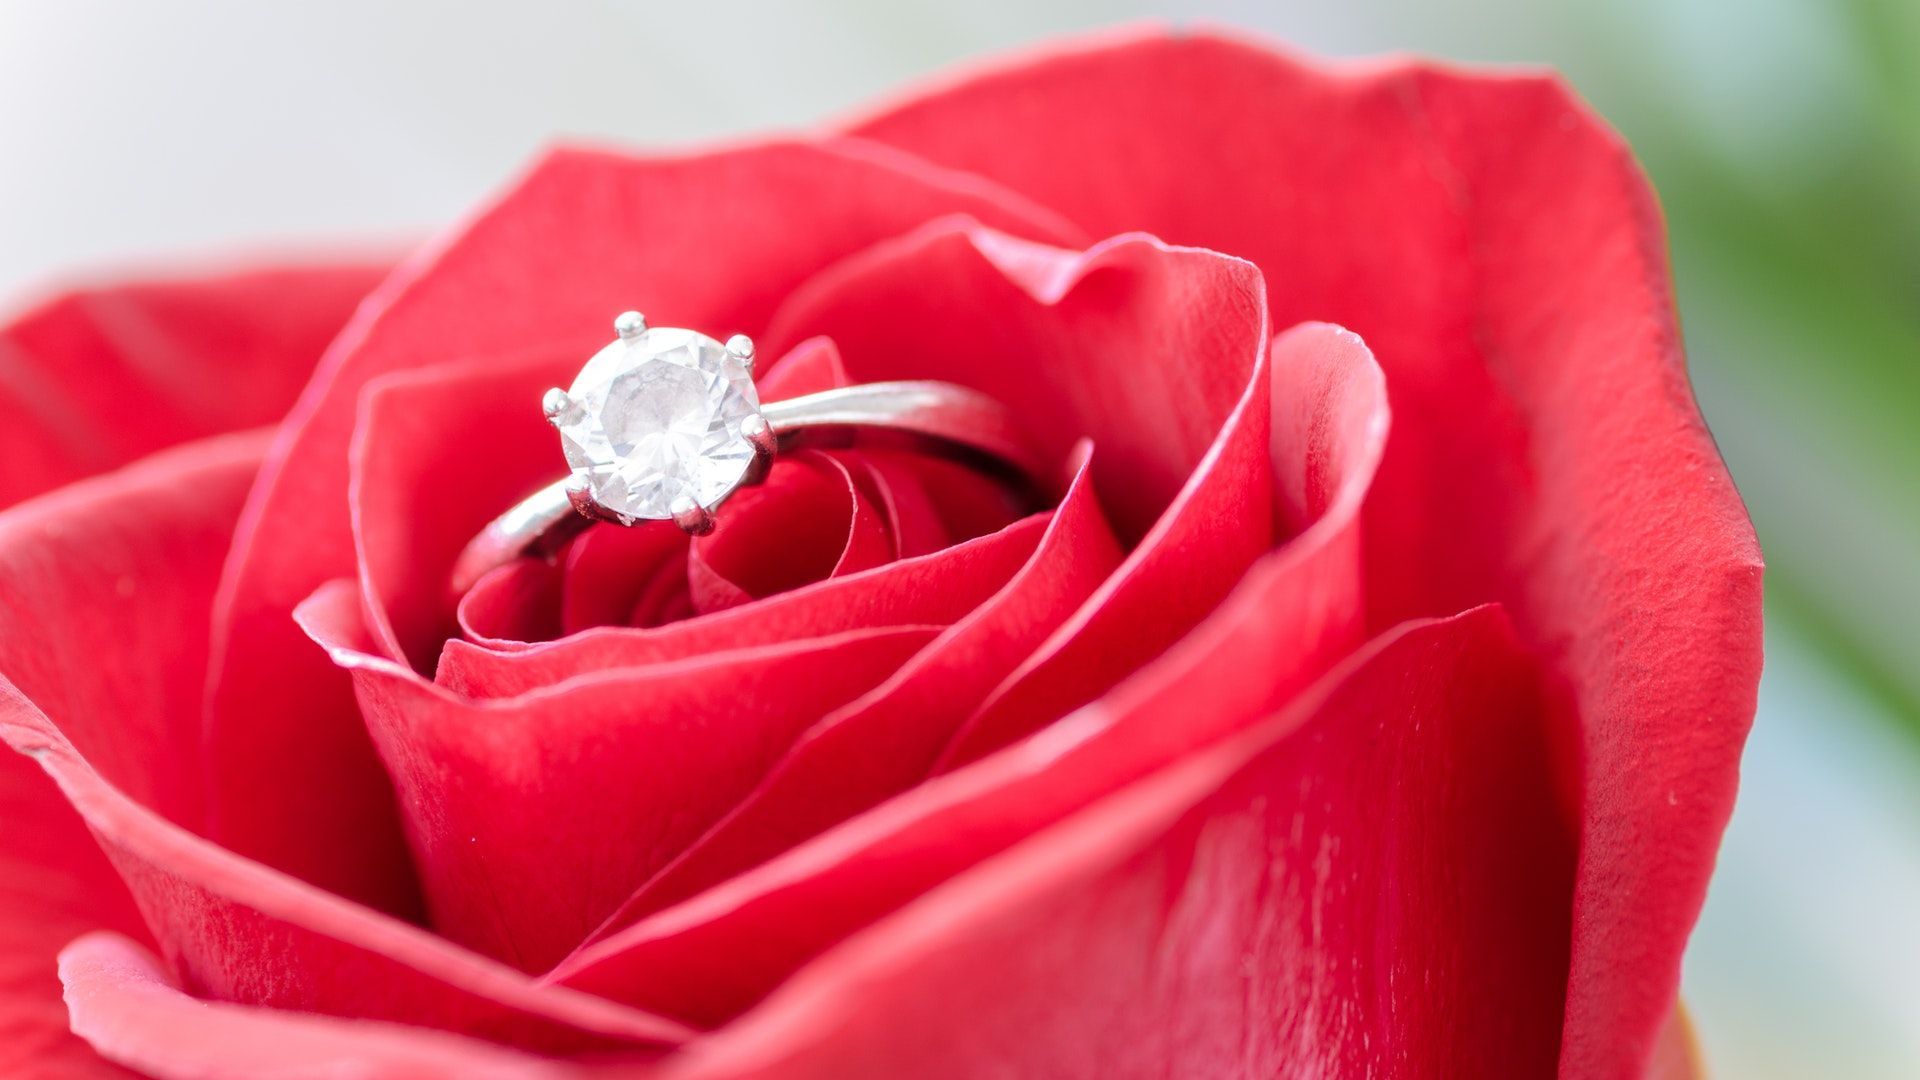 Rose with Diamond Ring Wallpaper